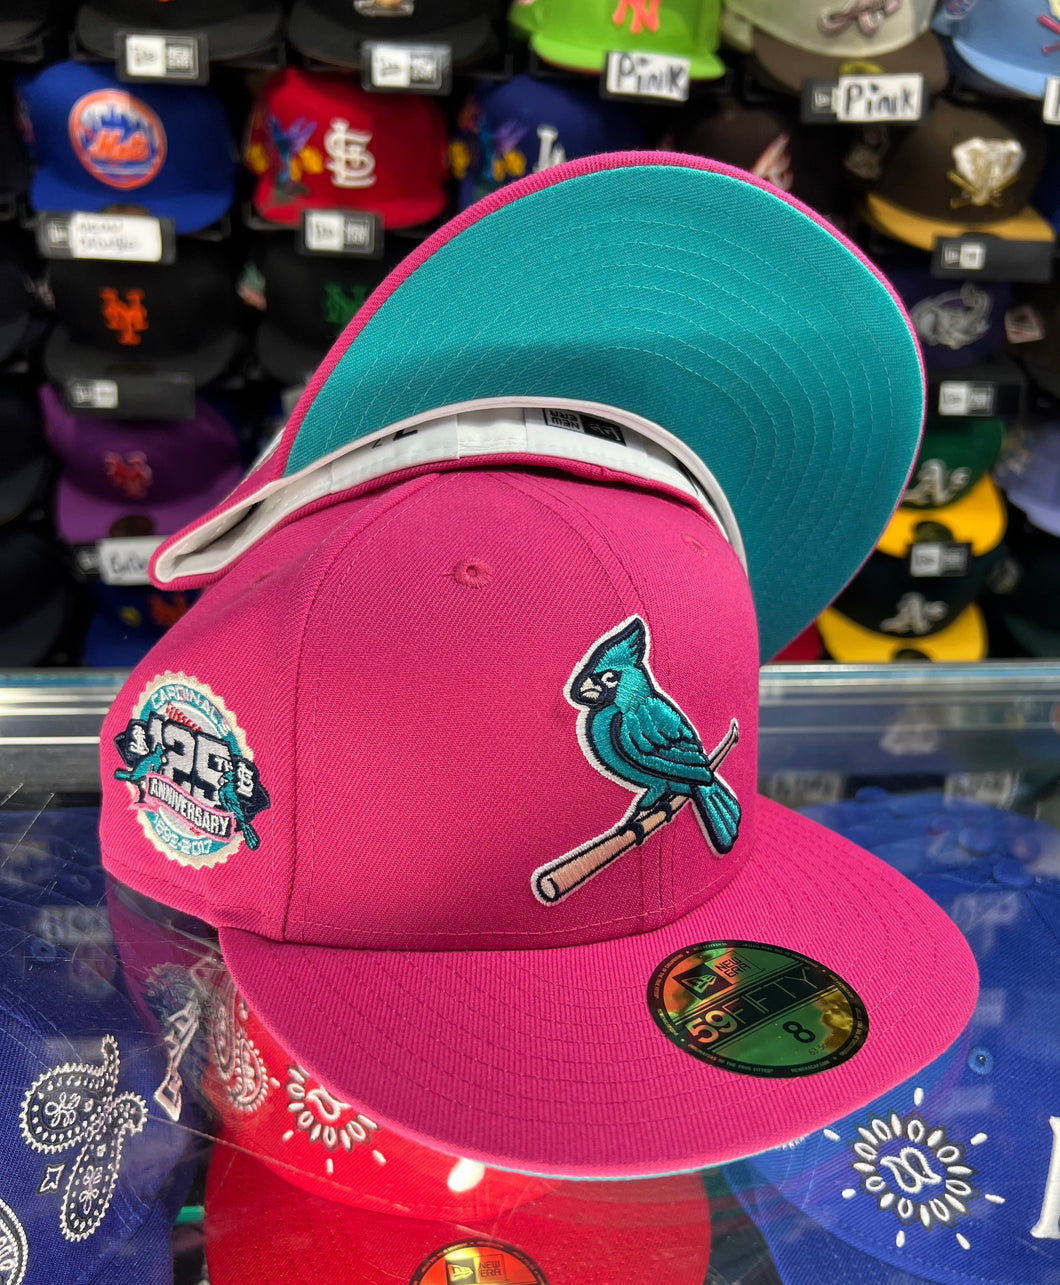 St. Louis Cardinals Hot Pink/Teal UV-RESTOCKED 71/4,7/8&8 only